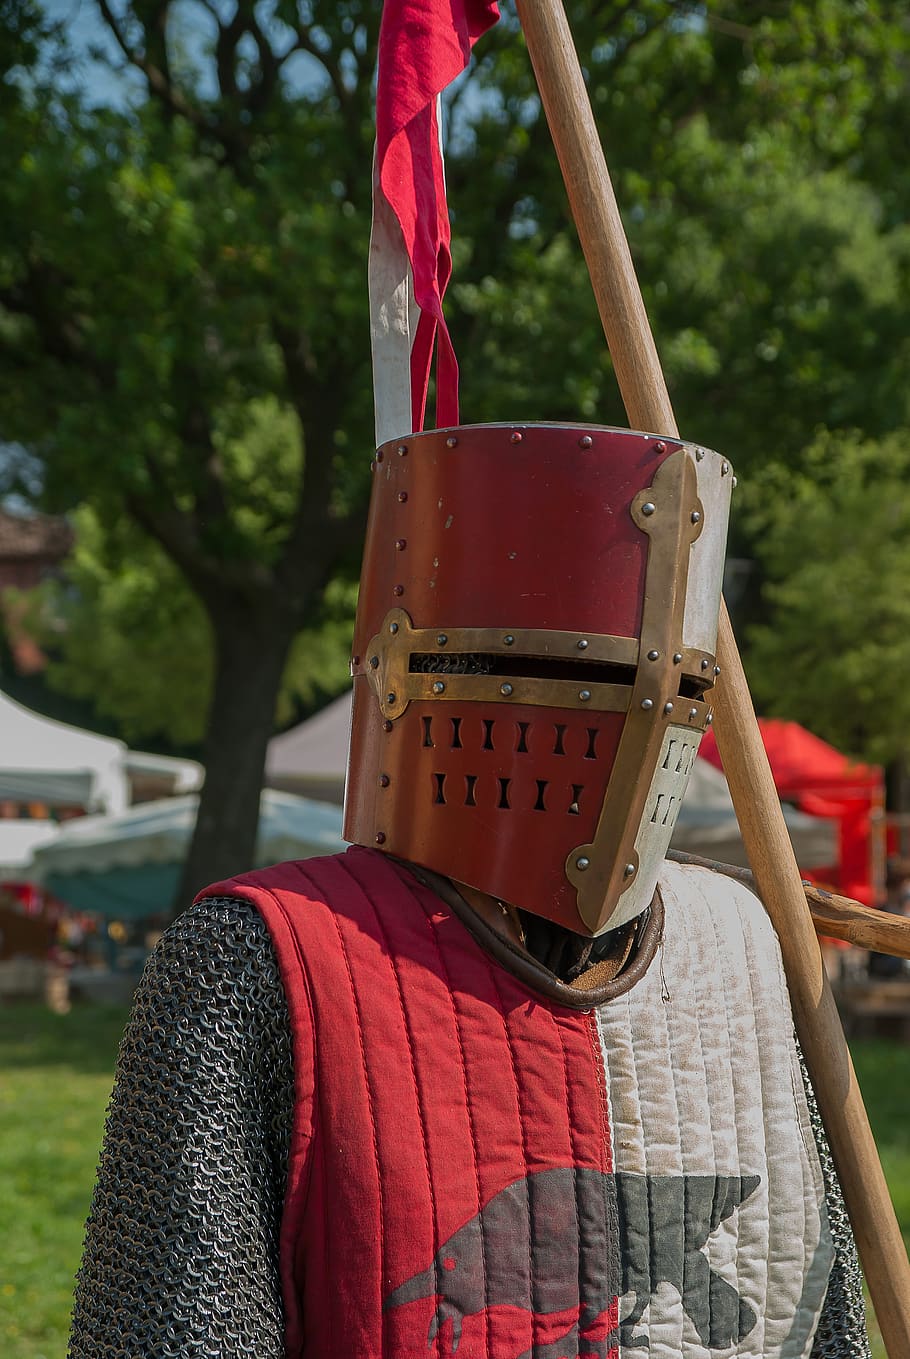 knight, helmet, armor, medieval festival, costume, focus on foreground, day, red, real people, tree